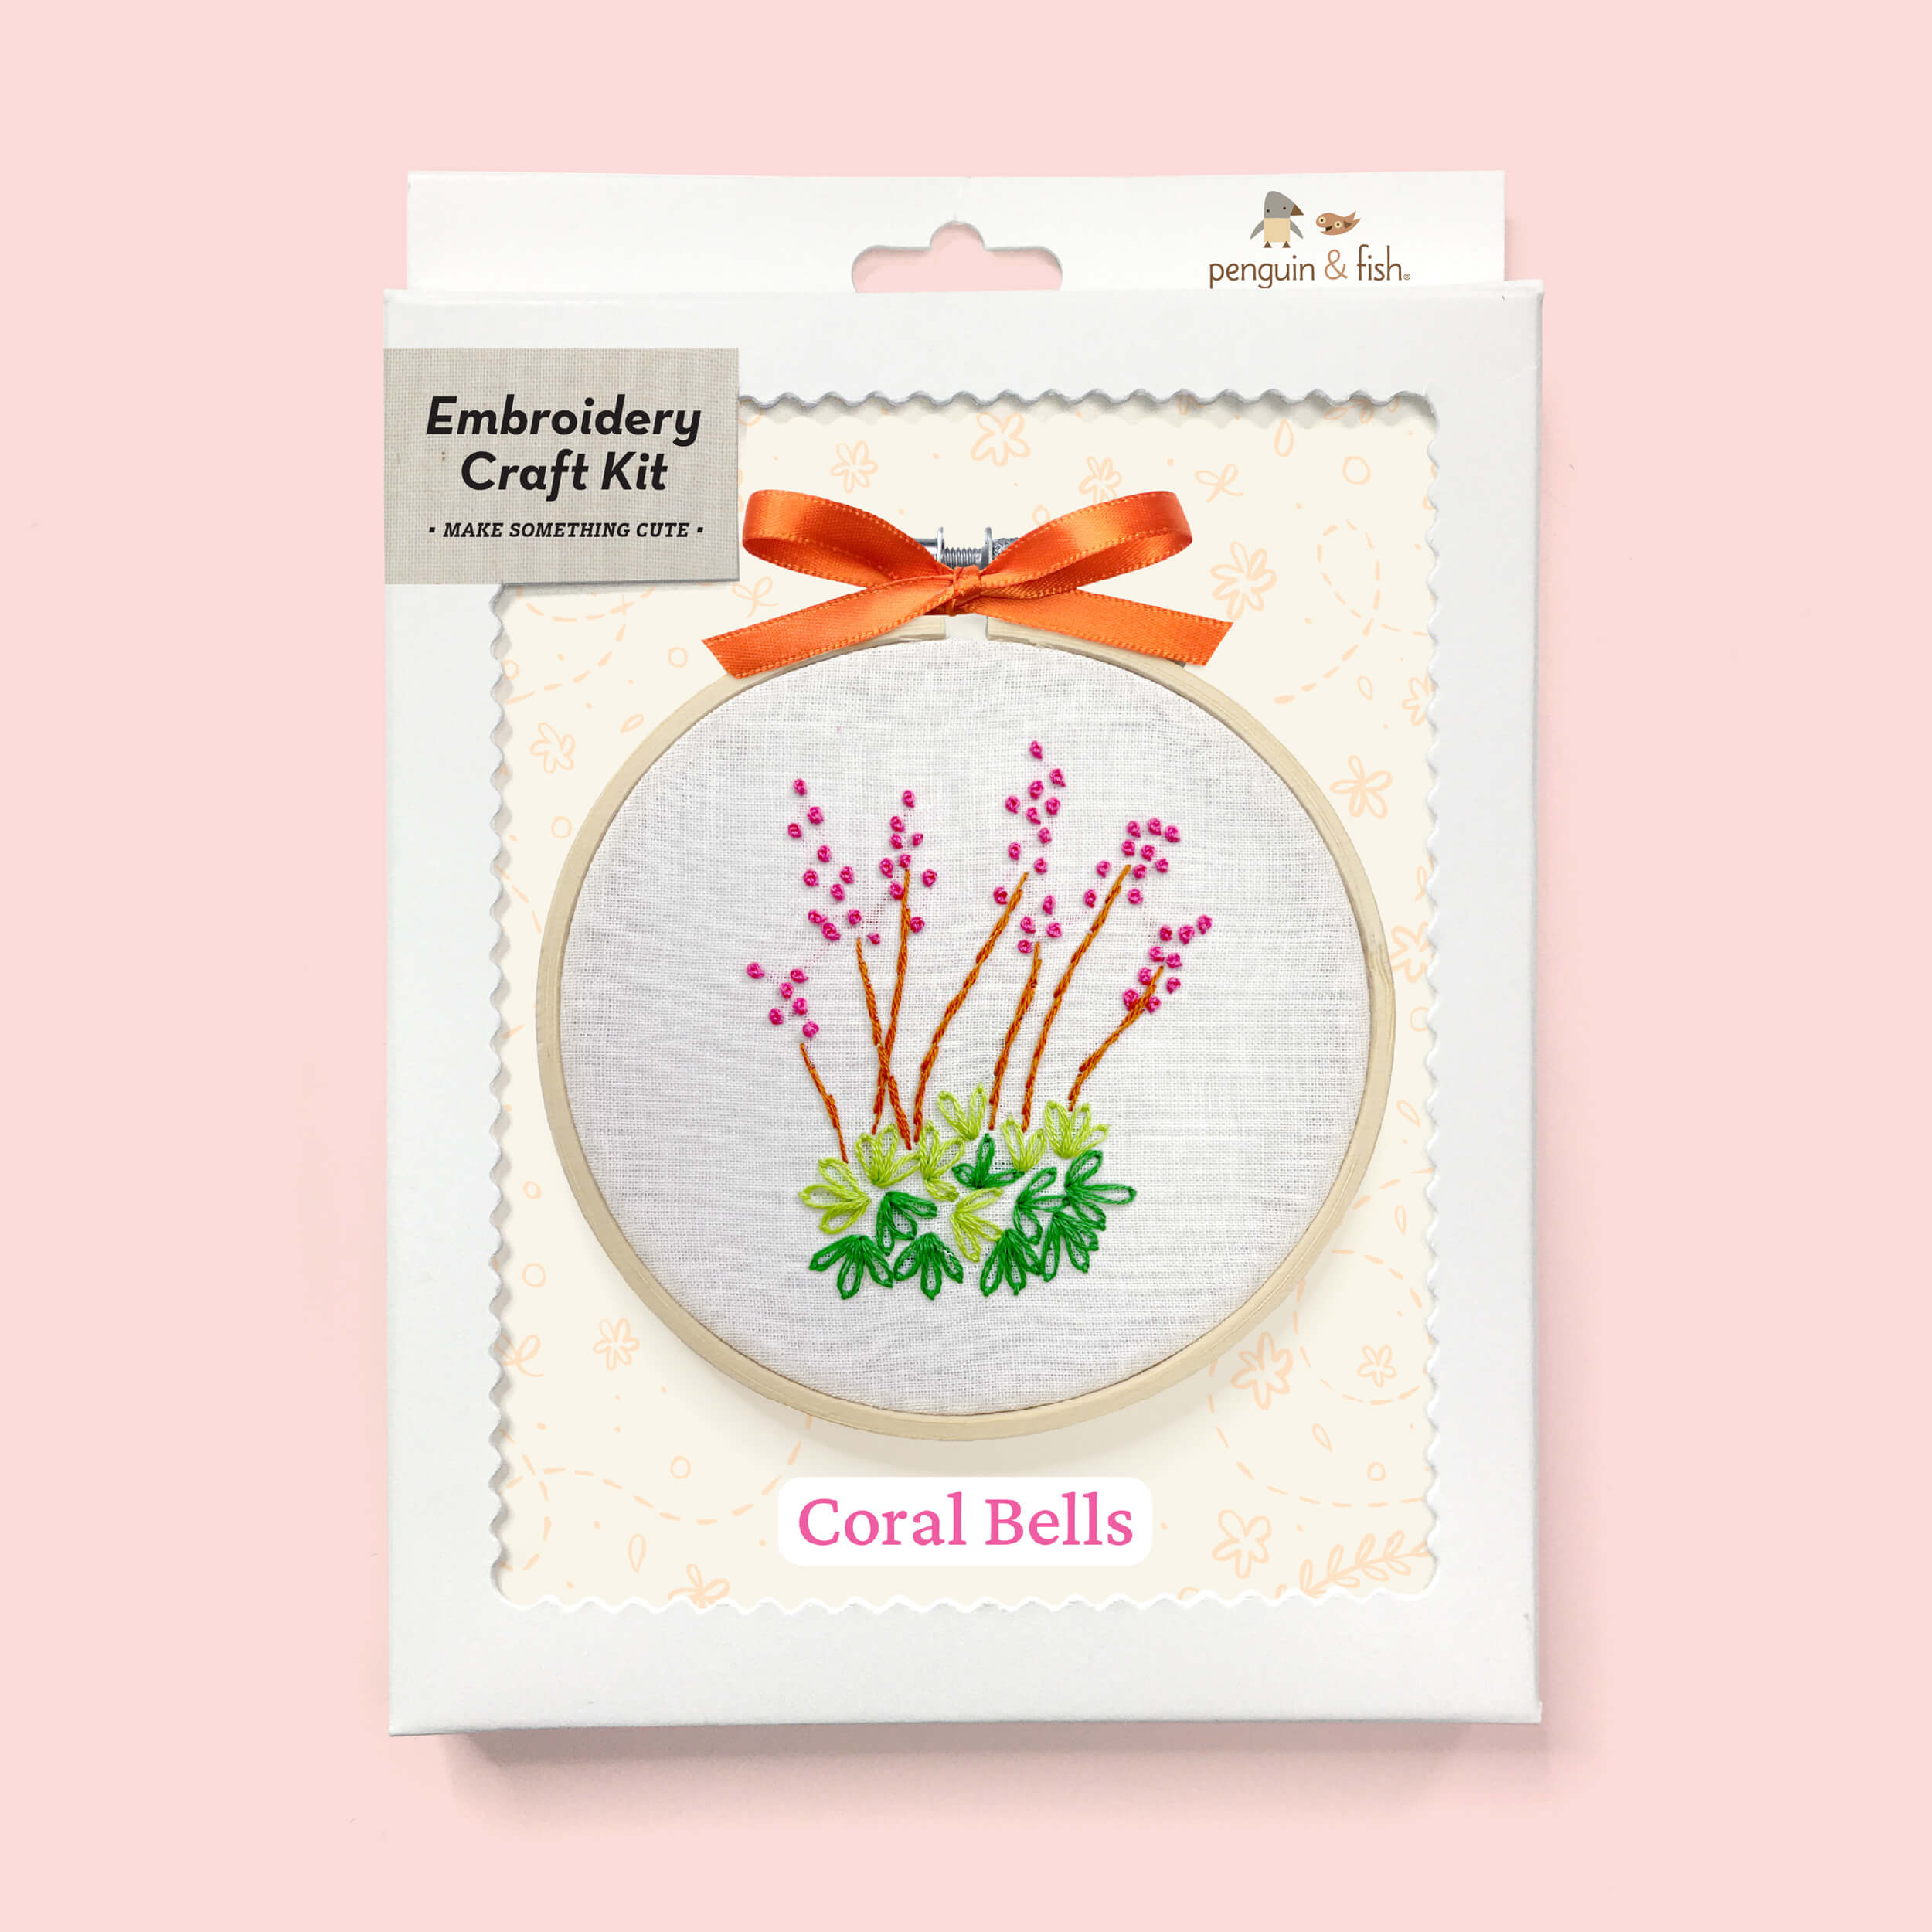 Coral Bells embroidery kit in a box